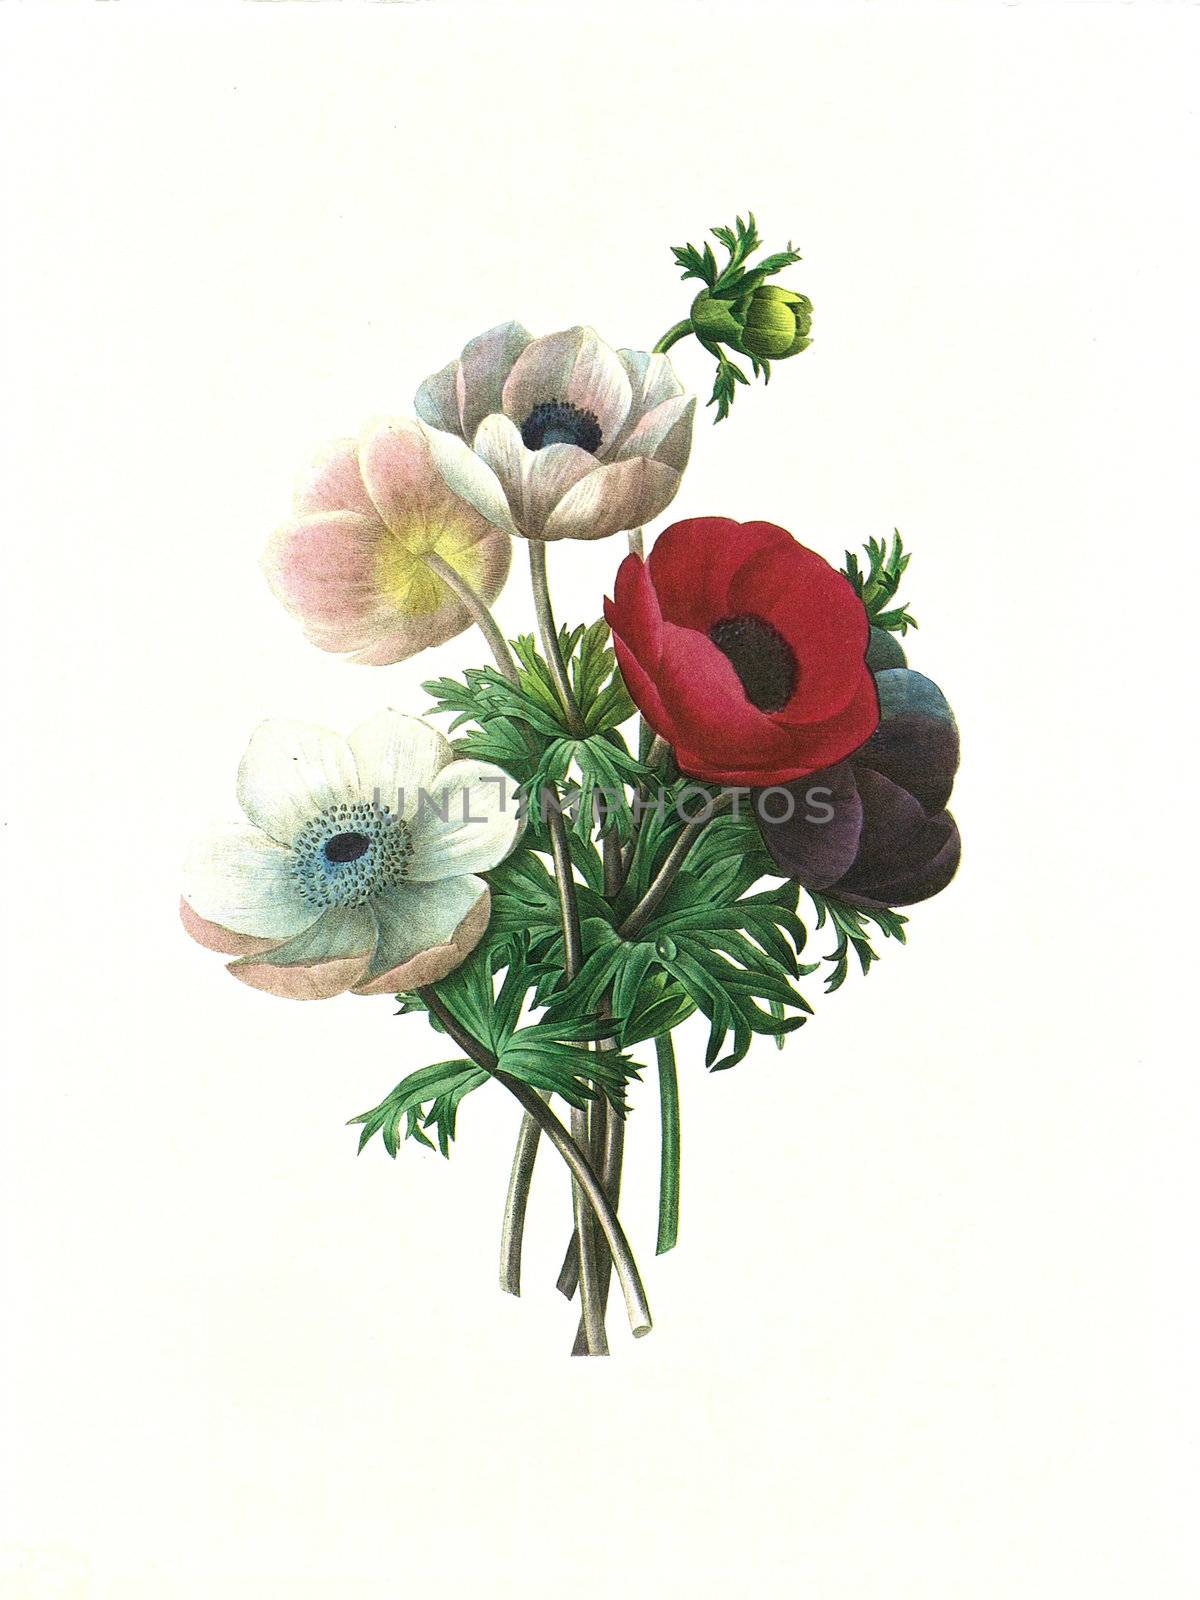 Antique illustration of a anemone simplex engraved by Pierre-Joseph Redoute (1759 - 1840), nicknamed "The Raphael of flowers".